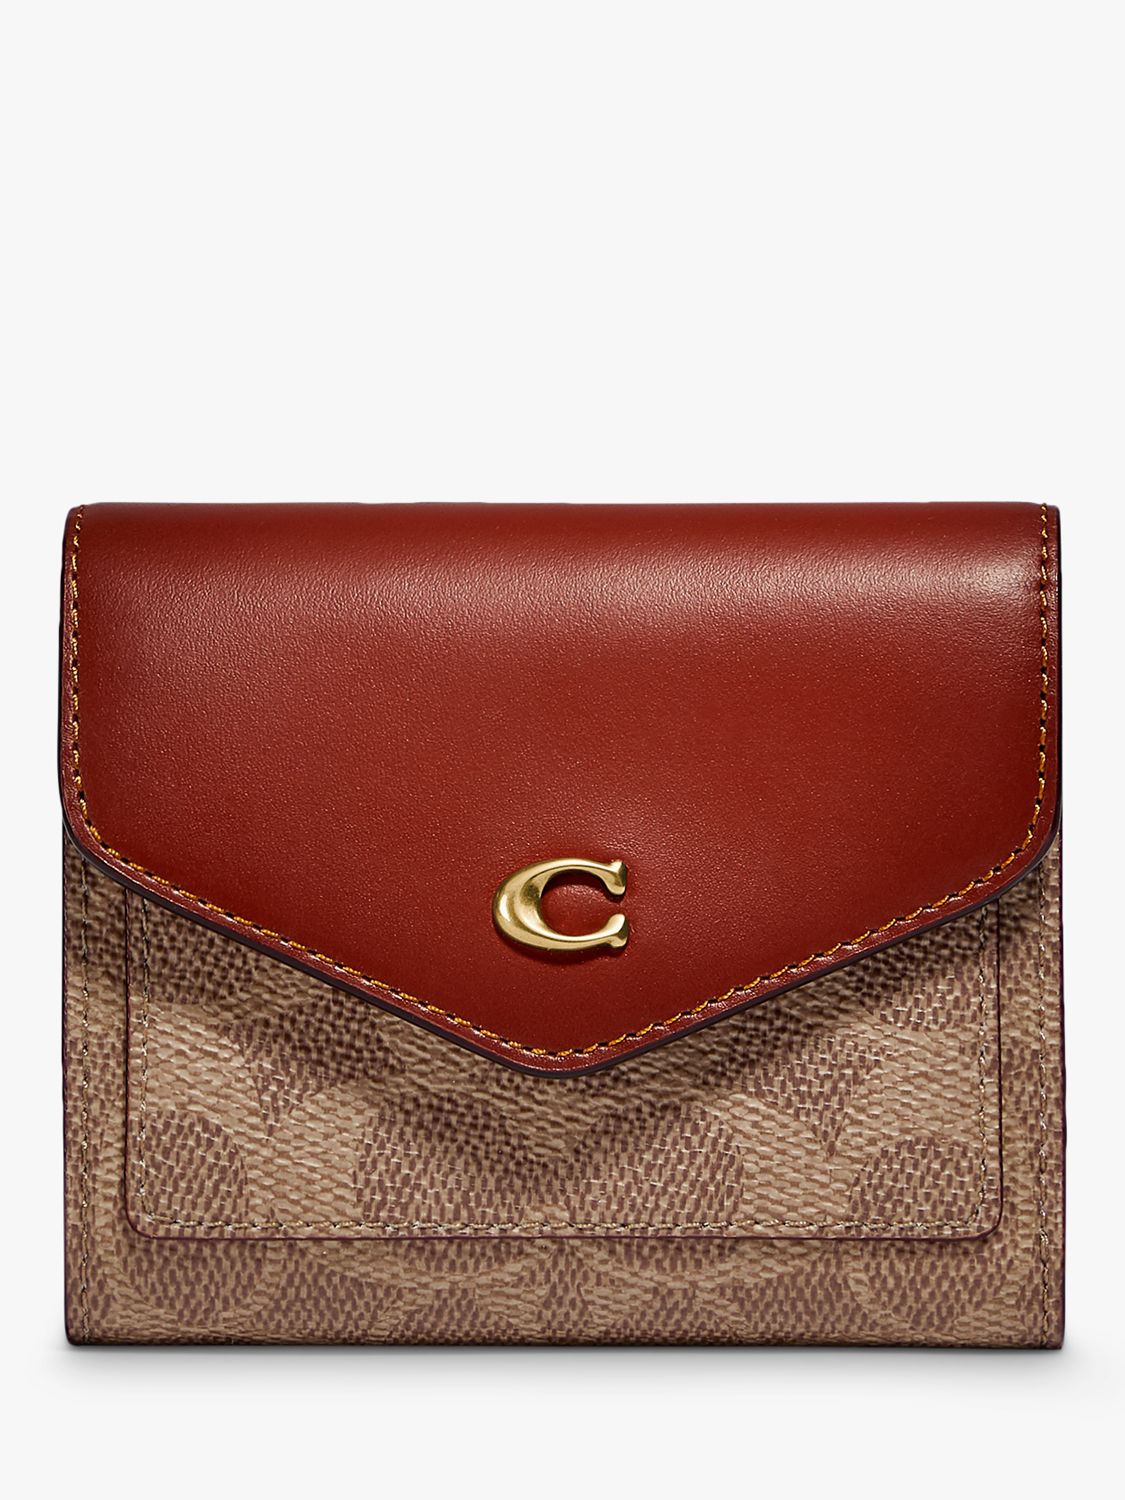 Buy Coach Small Signature Wallet, Tan/Rust Online at johnlewis.com